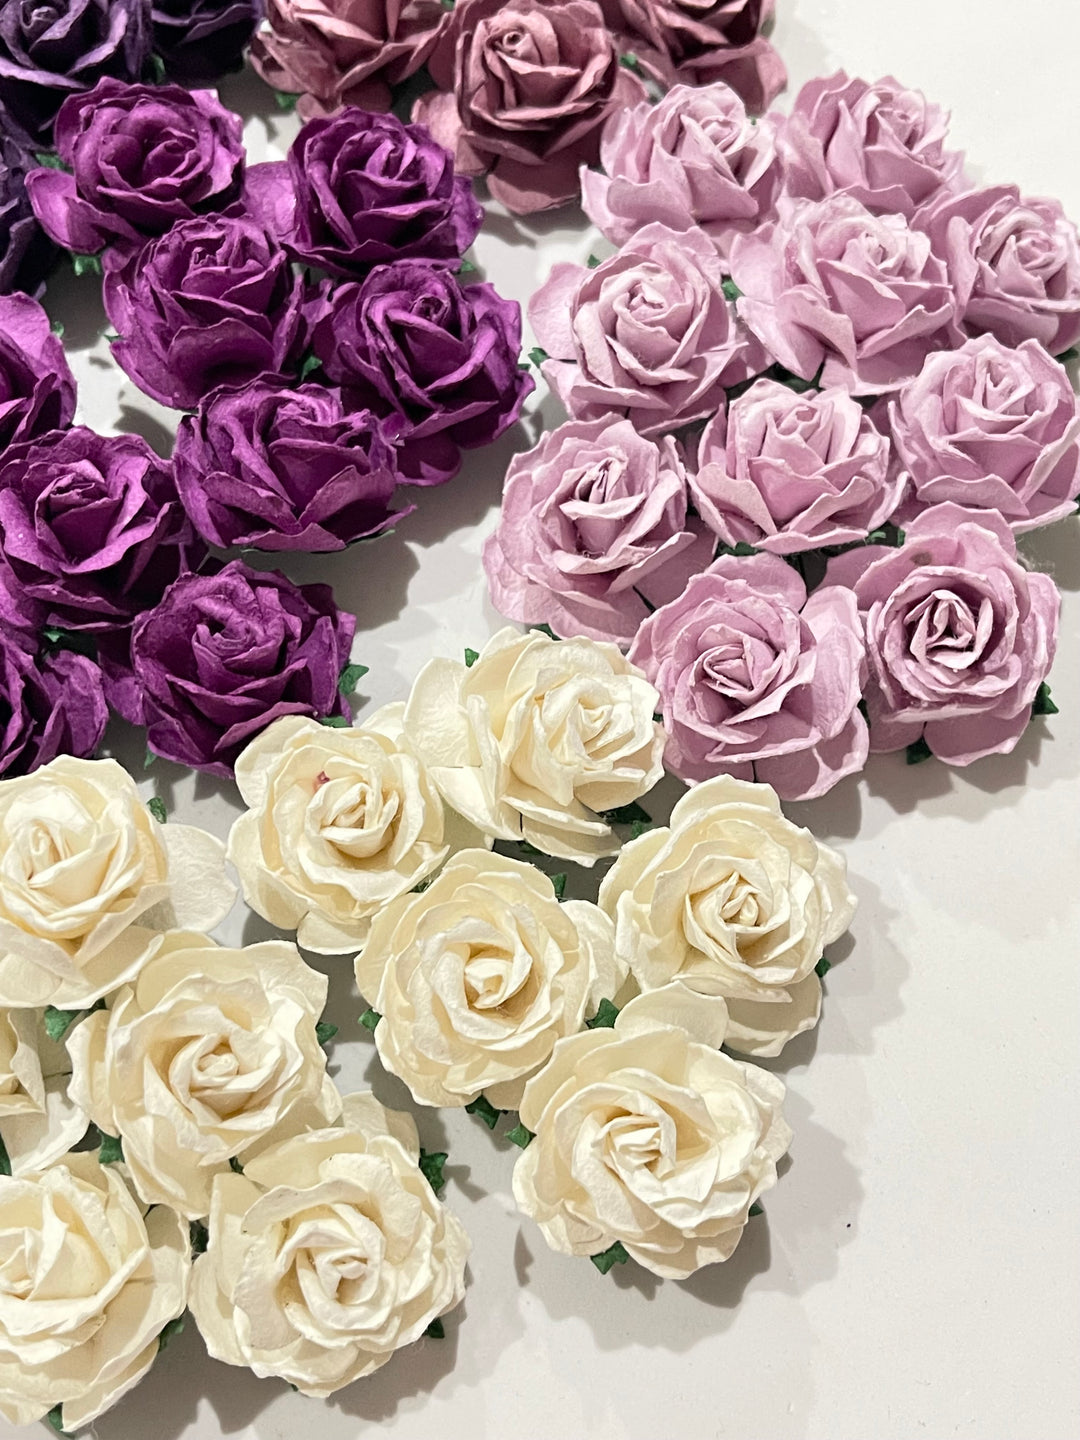 50 Pack 30mm Mixed Purple Lilac Wild Roses Mulberry Paper Roses (10 Colours, 5 Stem per colour)